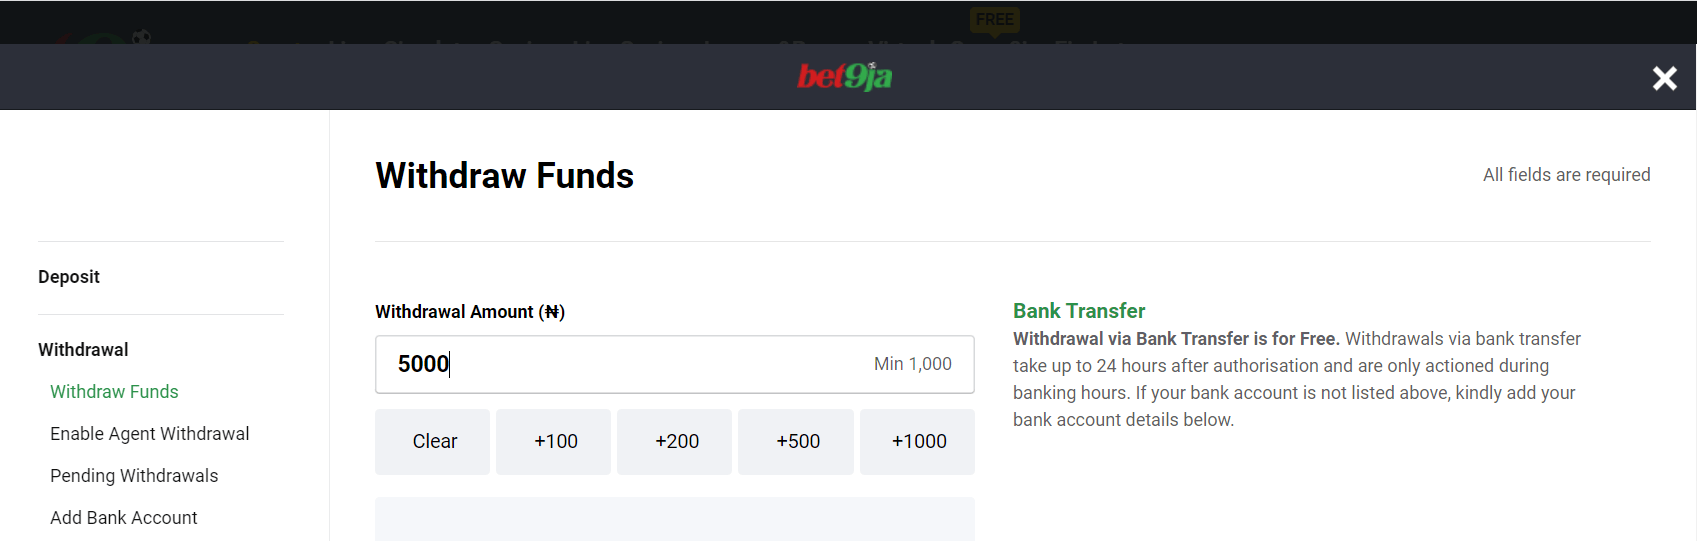 Withdraw Funds from Bet9ja